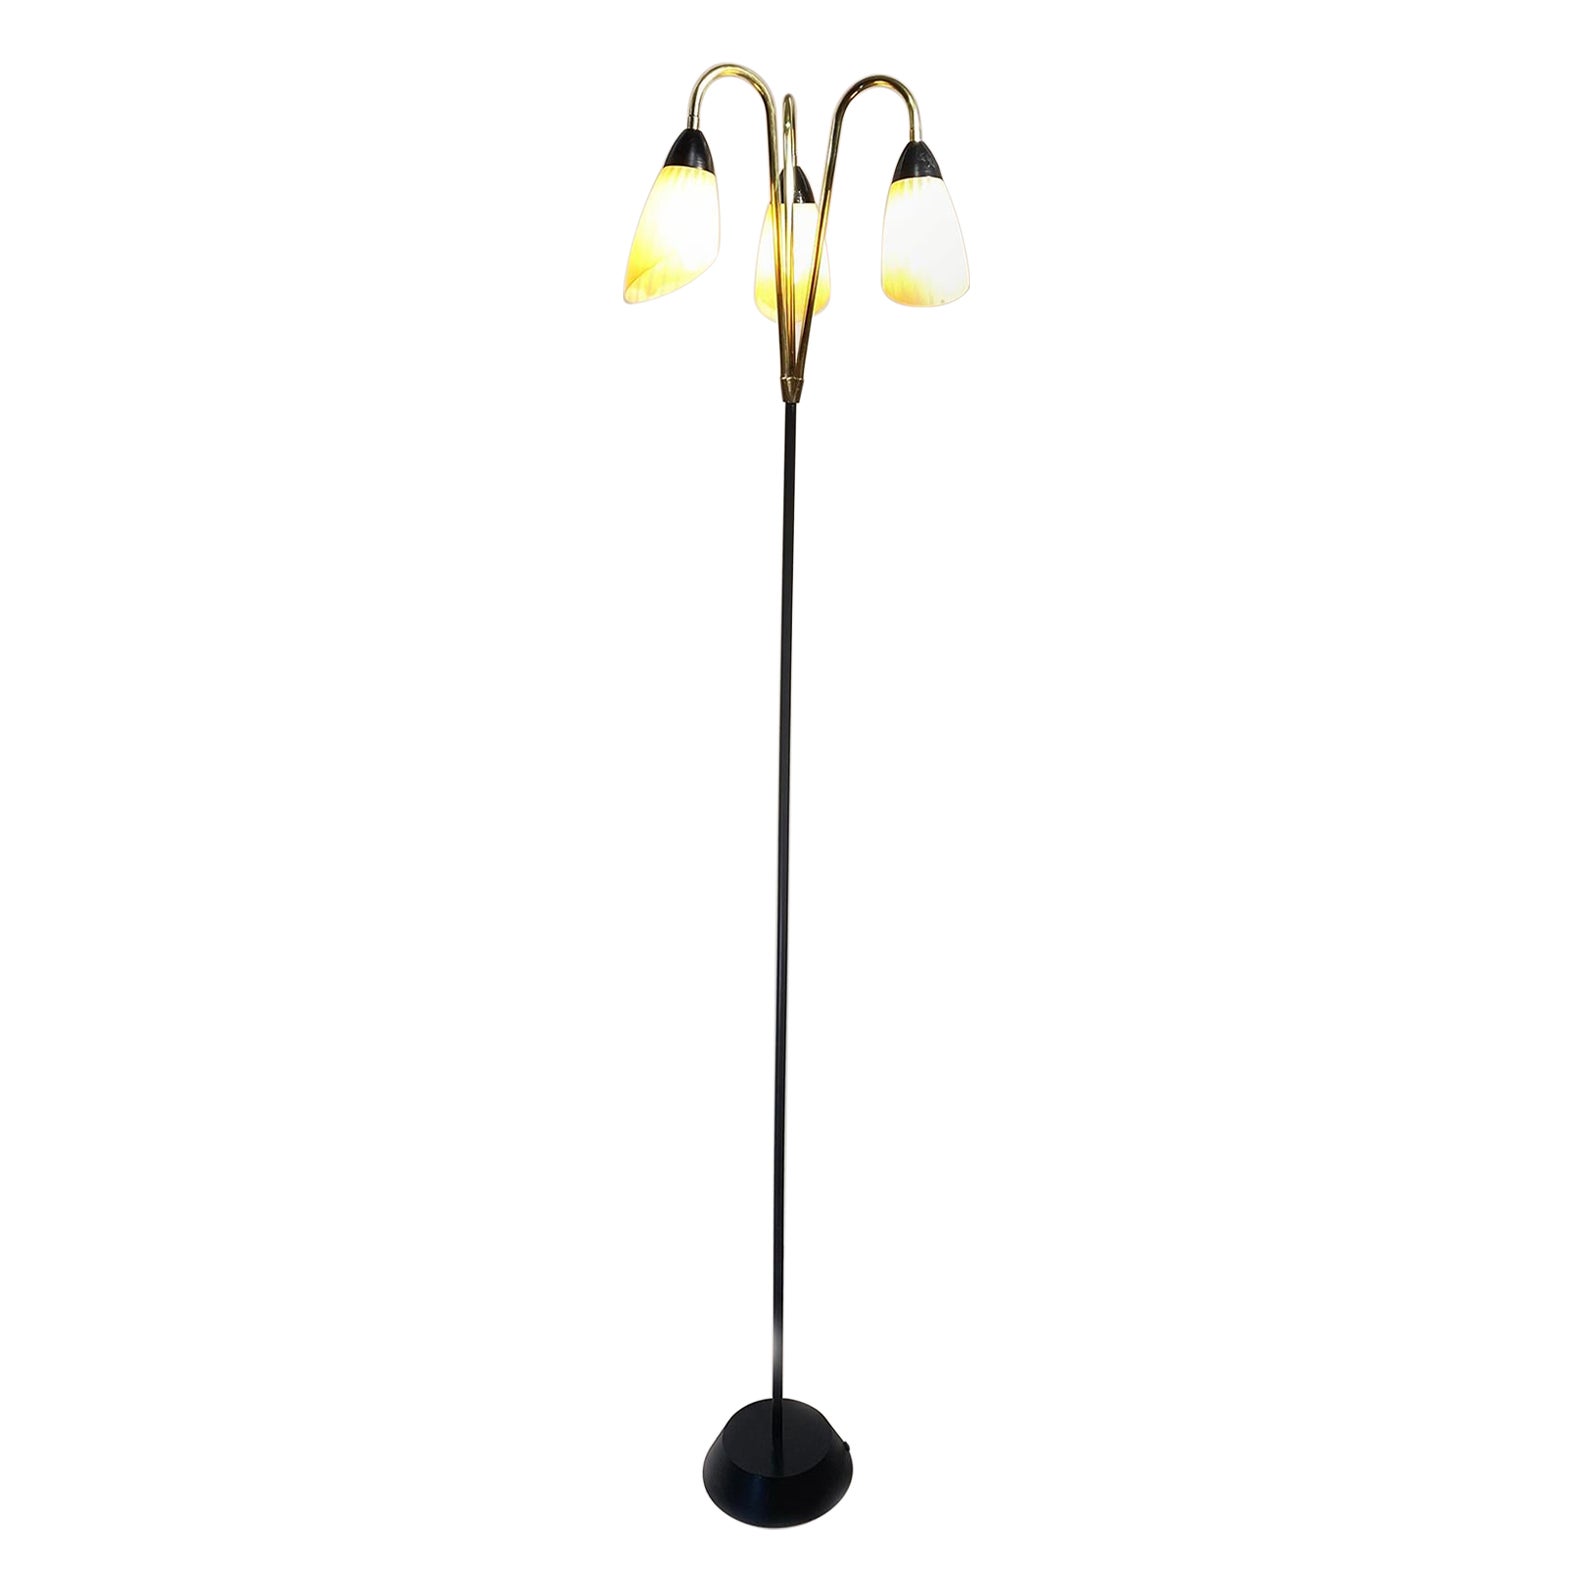 French Brass and Black Metal Floor Lamp with 3 Glass Lights, 1950s